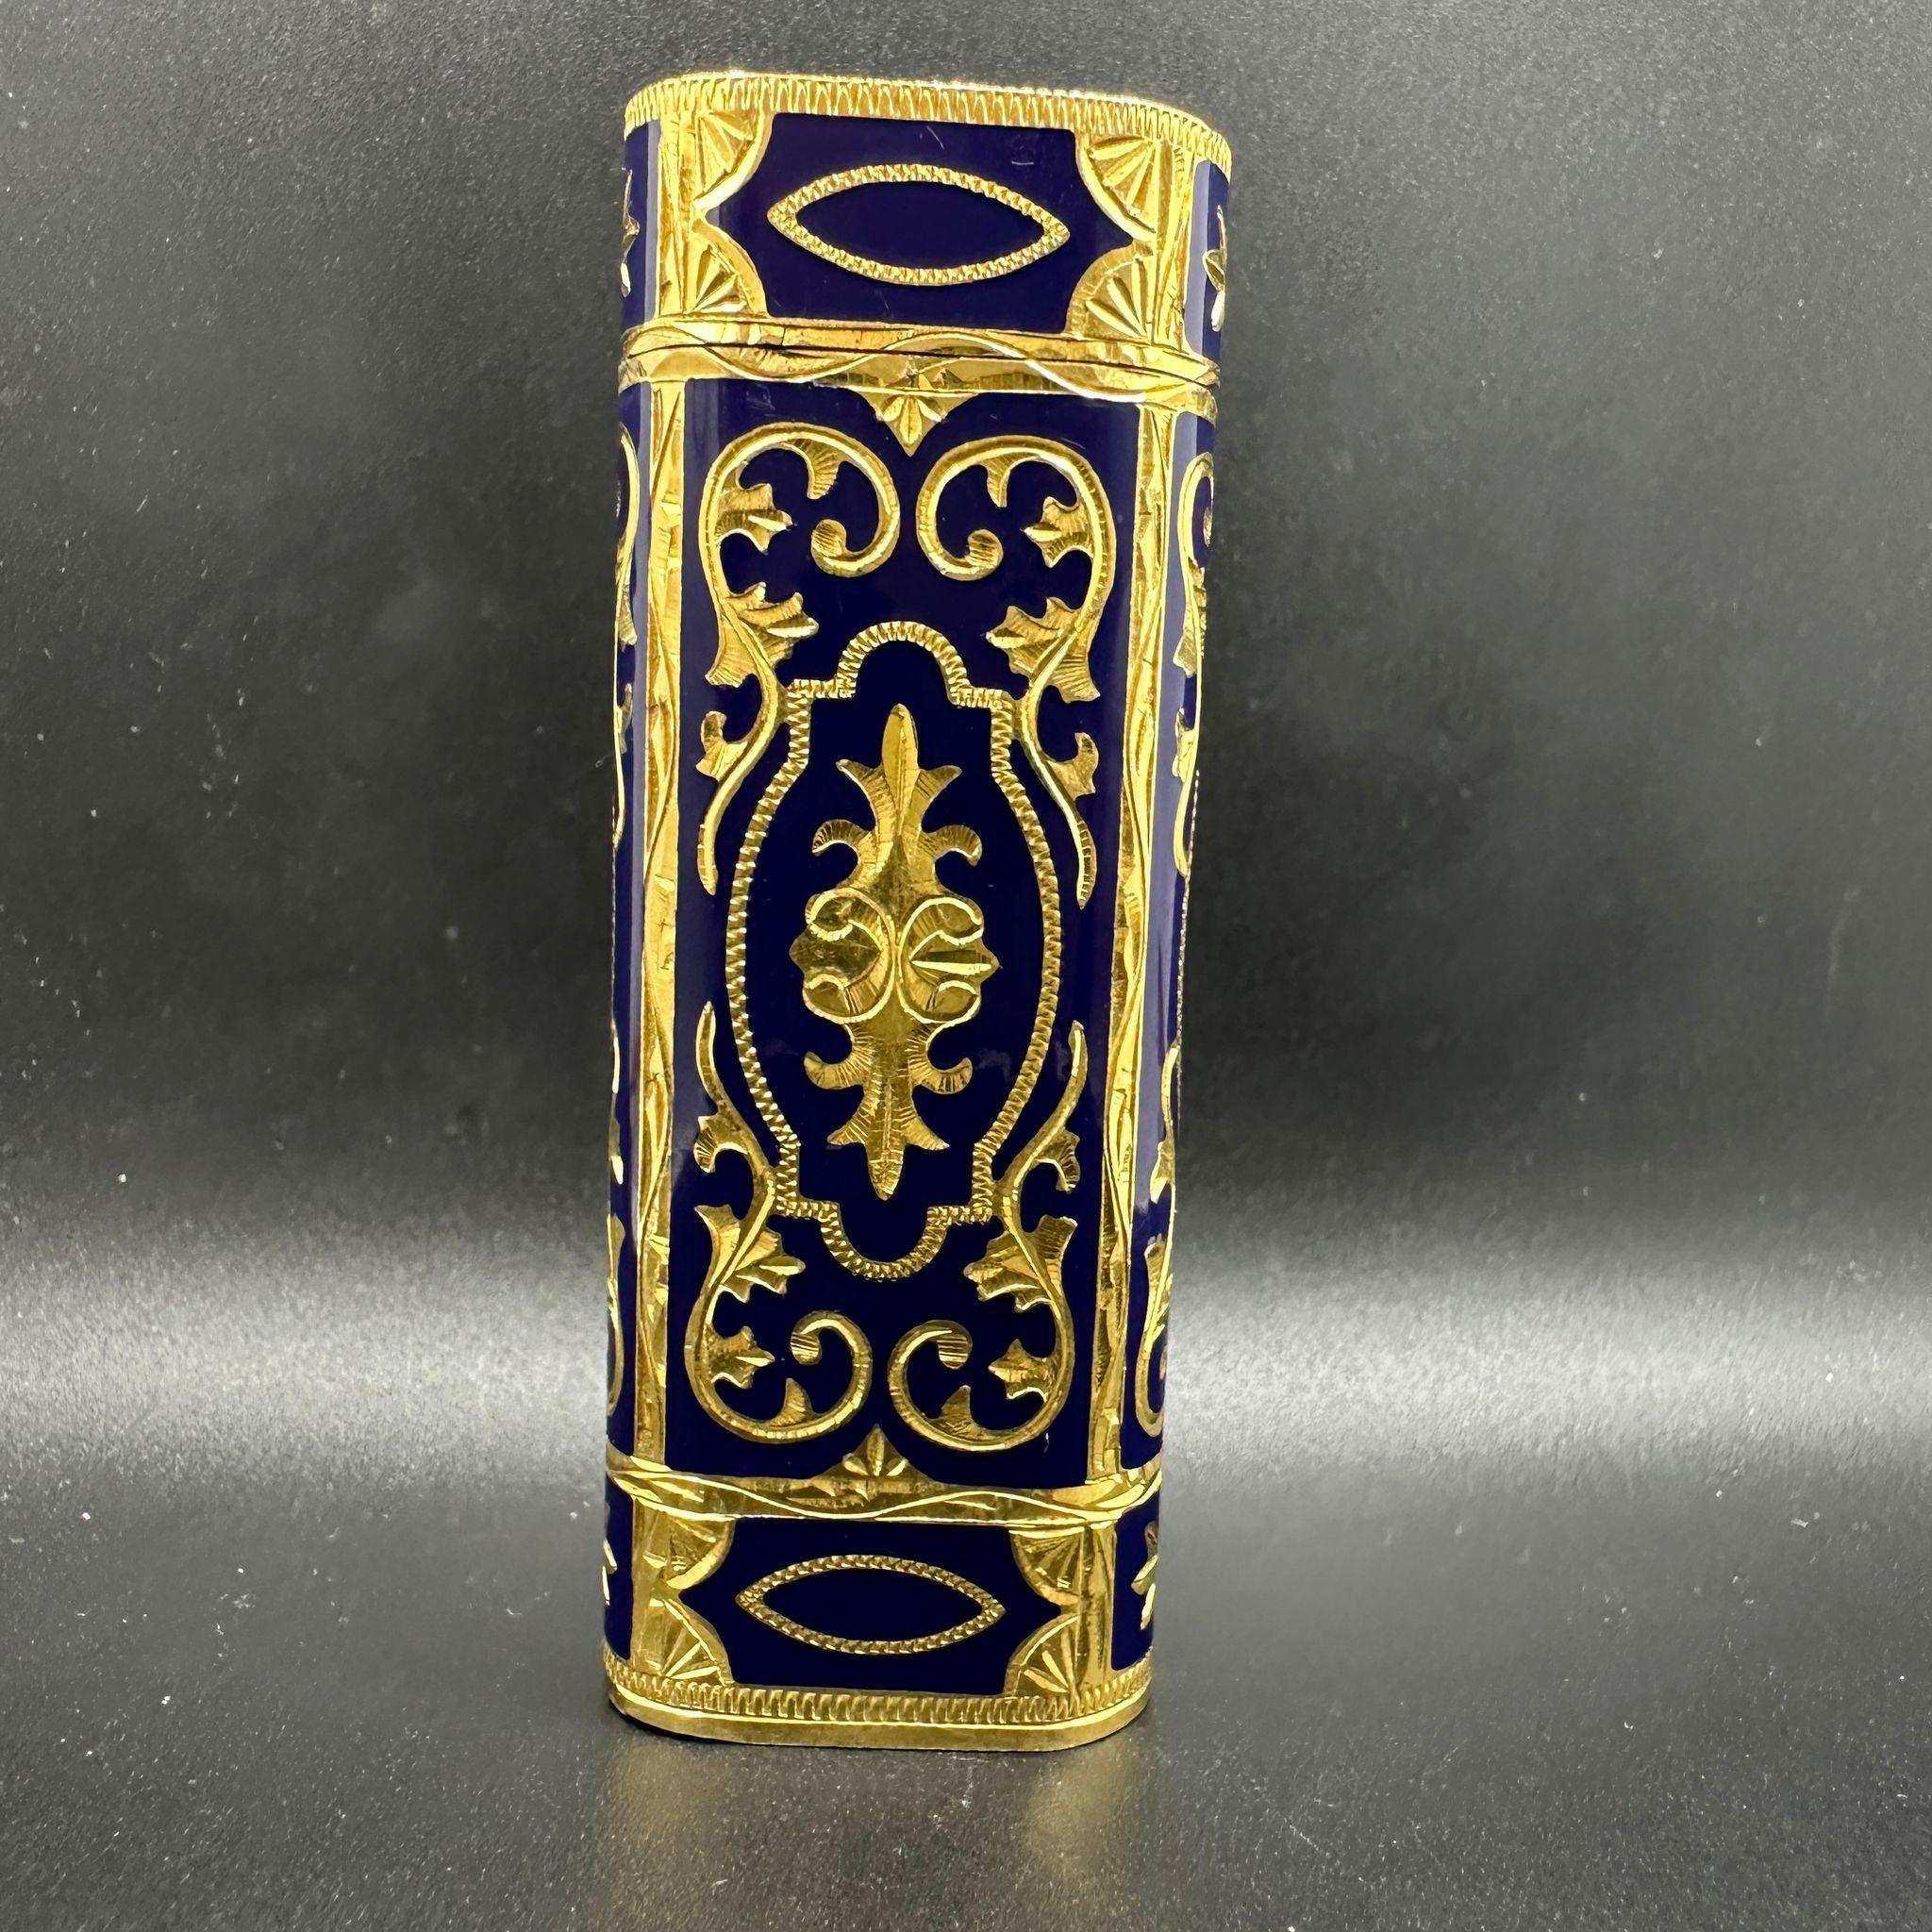 Cartier “Royking” lighter.
Circe 1970
CARTIER  Roy King Rollagas, a Unique RARE example of a ROYKING designed Cartier Rollagas lighter made circa 1970's, 18K Gold Baroque Inlay with Dark Blue lacquer, mint condition.
Roy King emblem on top side part